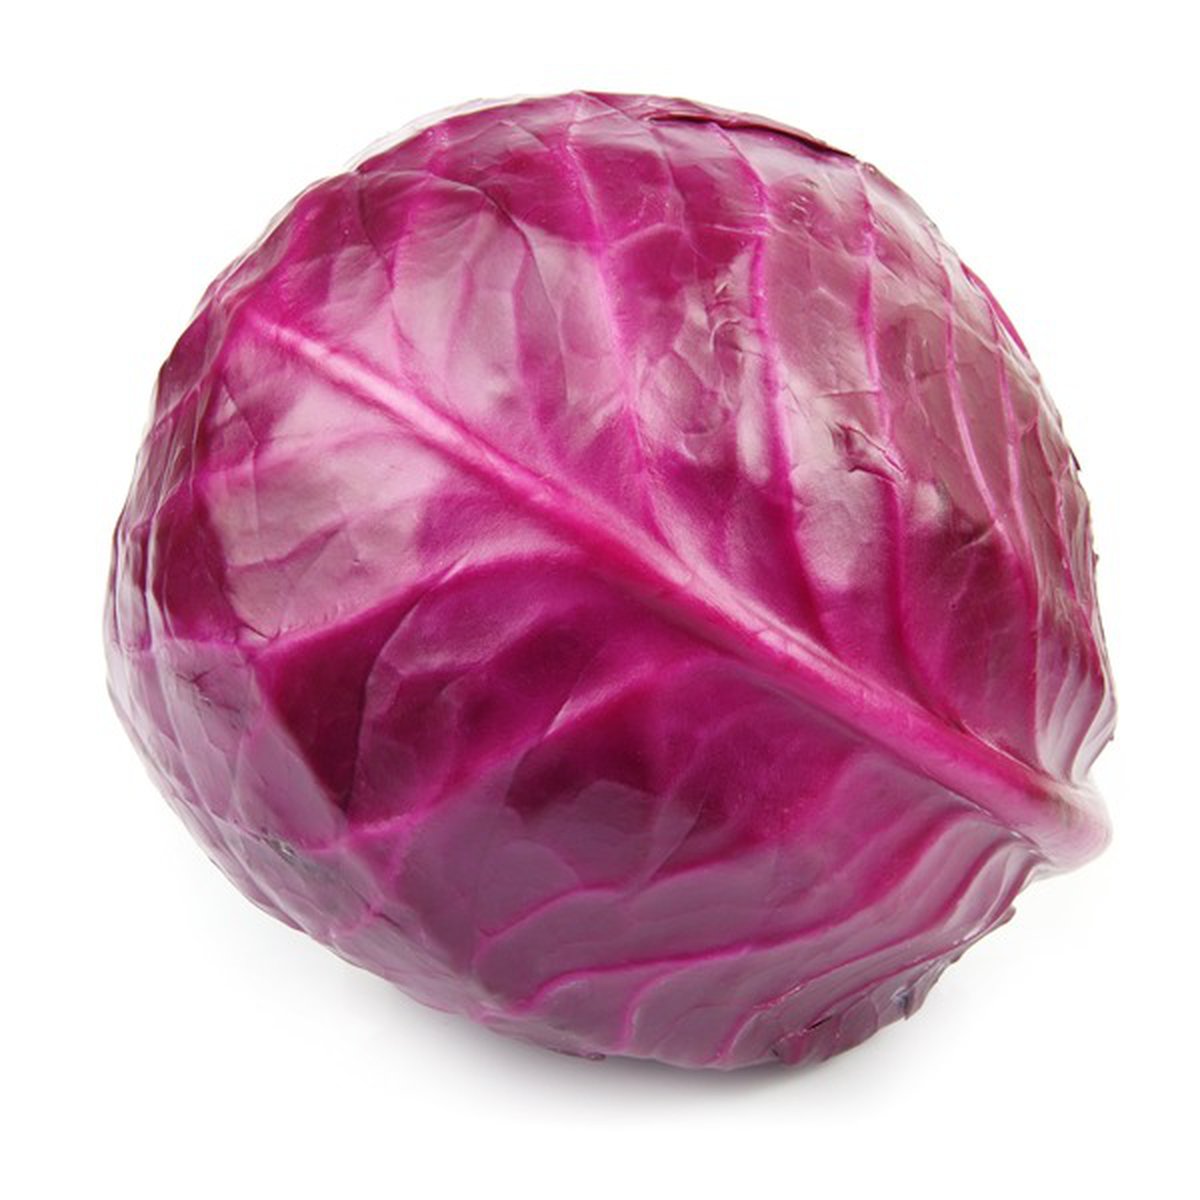 small red cabbage